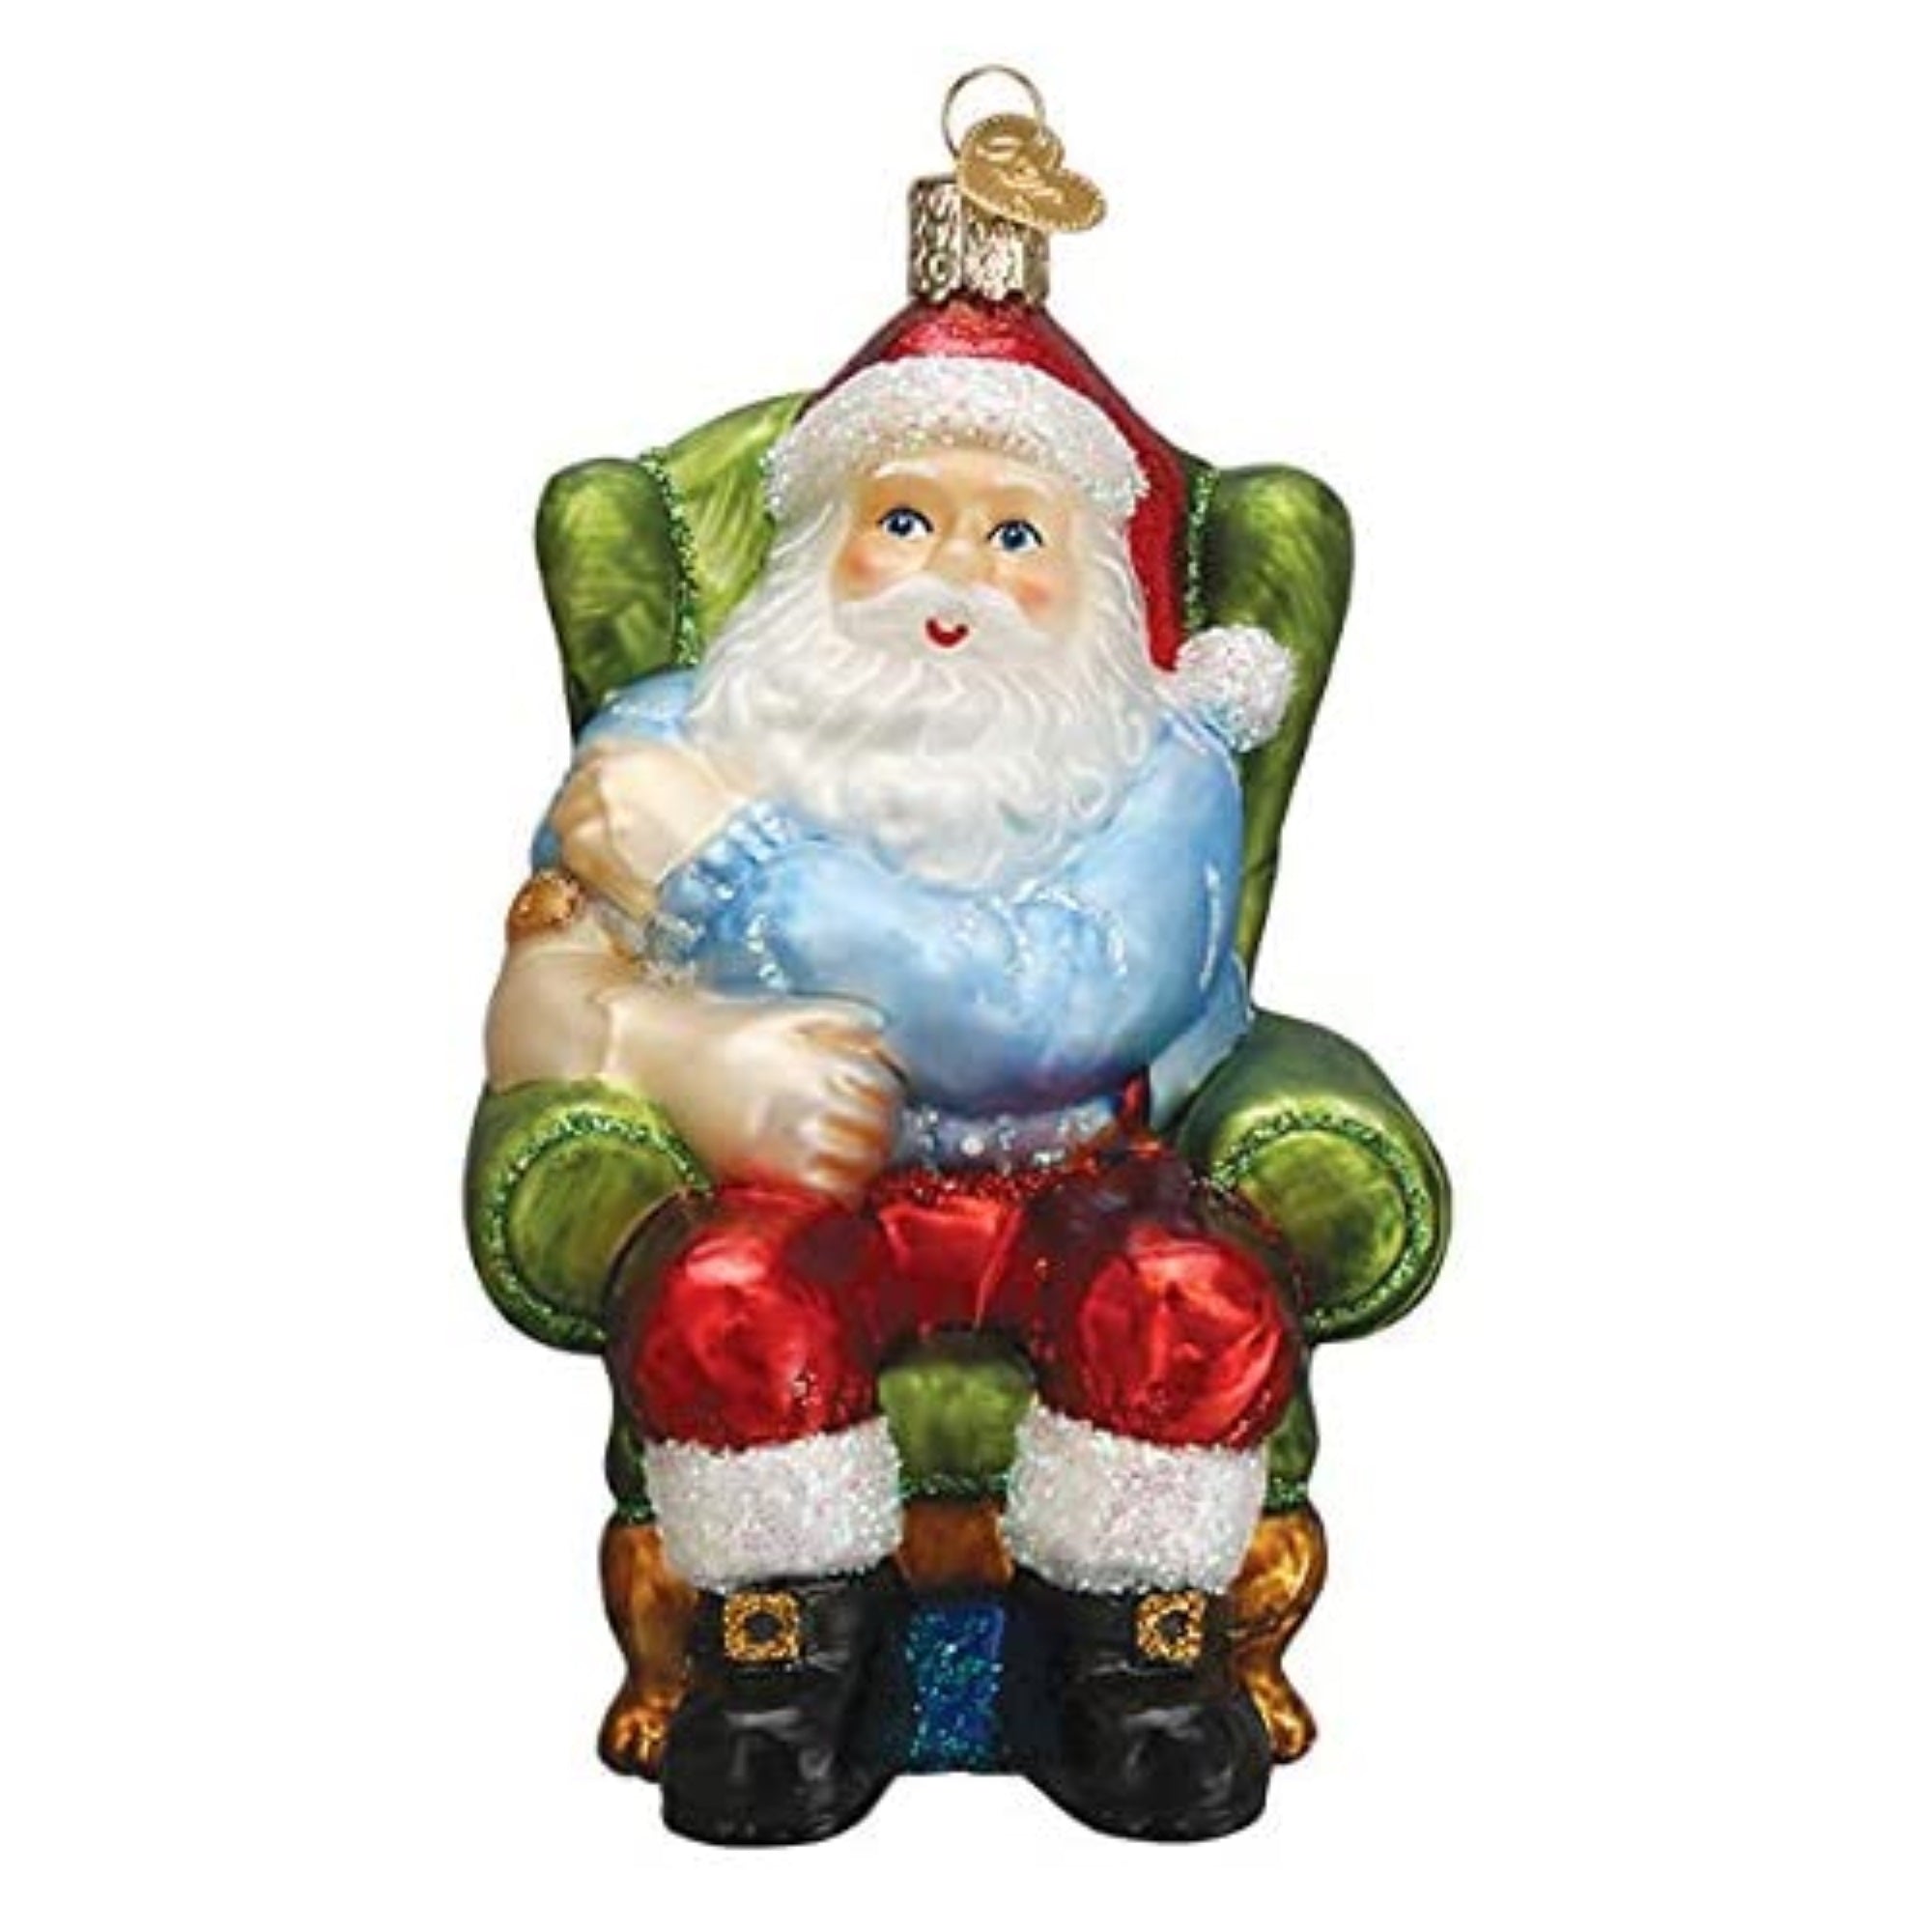 Old World Christmas Ornaments Santa Vaccinated Glass Blown Ornaments for Christmas Tree